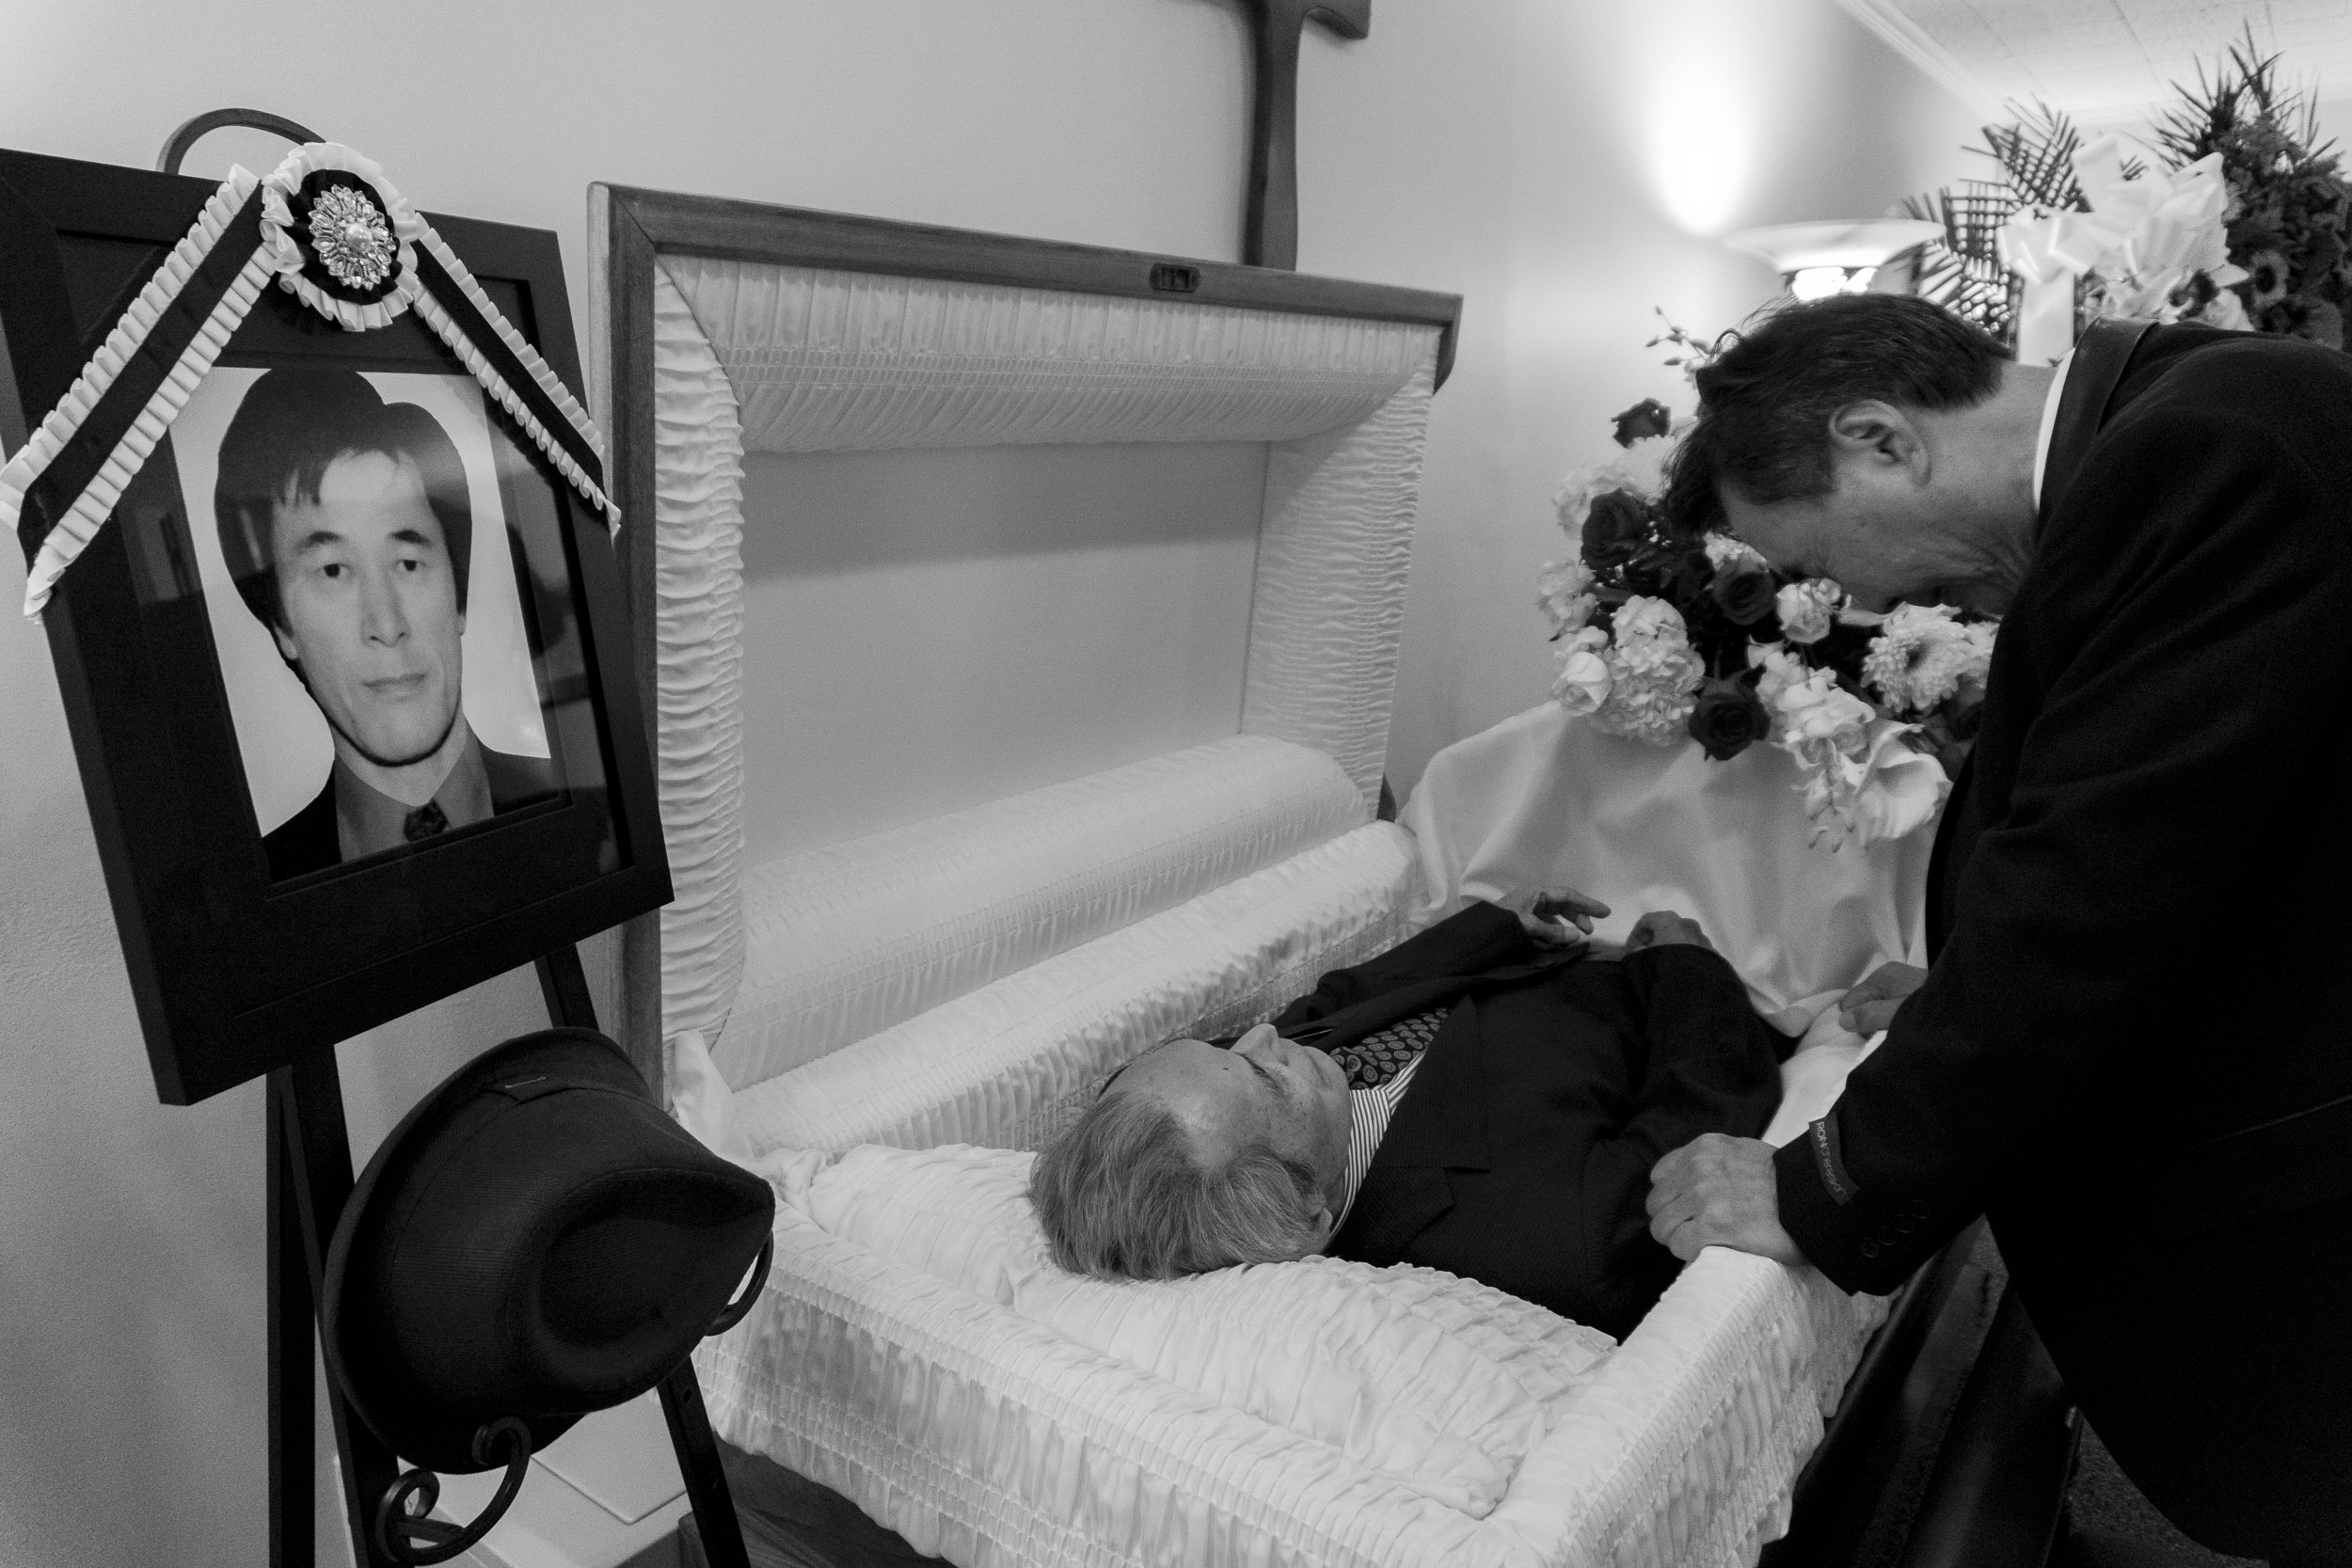  Suksoo Kim, who Chinsoo Kim had the closest relationship with out of his surviving siblings, looks at his older brother’s face for the final time before the casket is closed. A picture of Chinsoo Kim looks over the scene. Chinsoo Kim died on 9/14/17